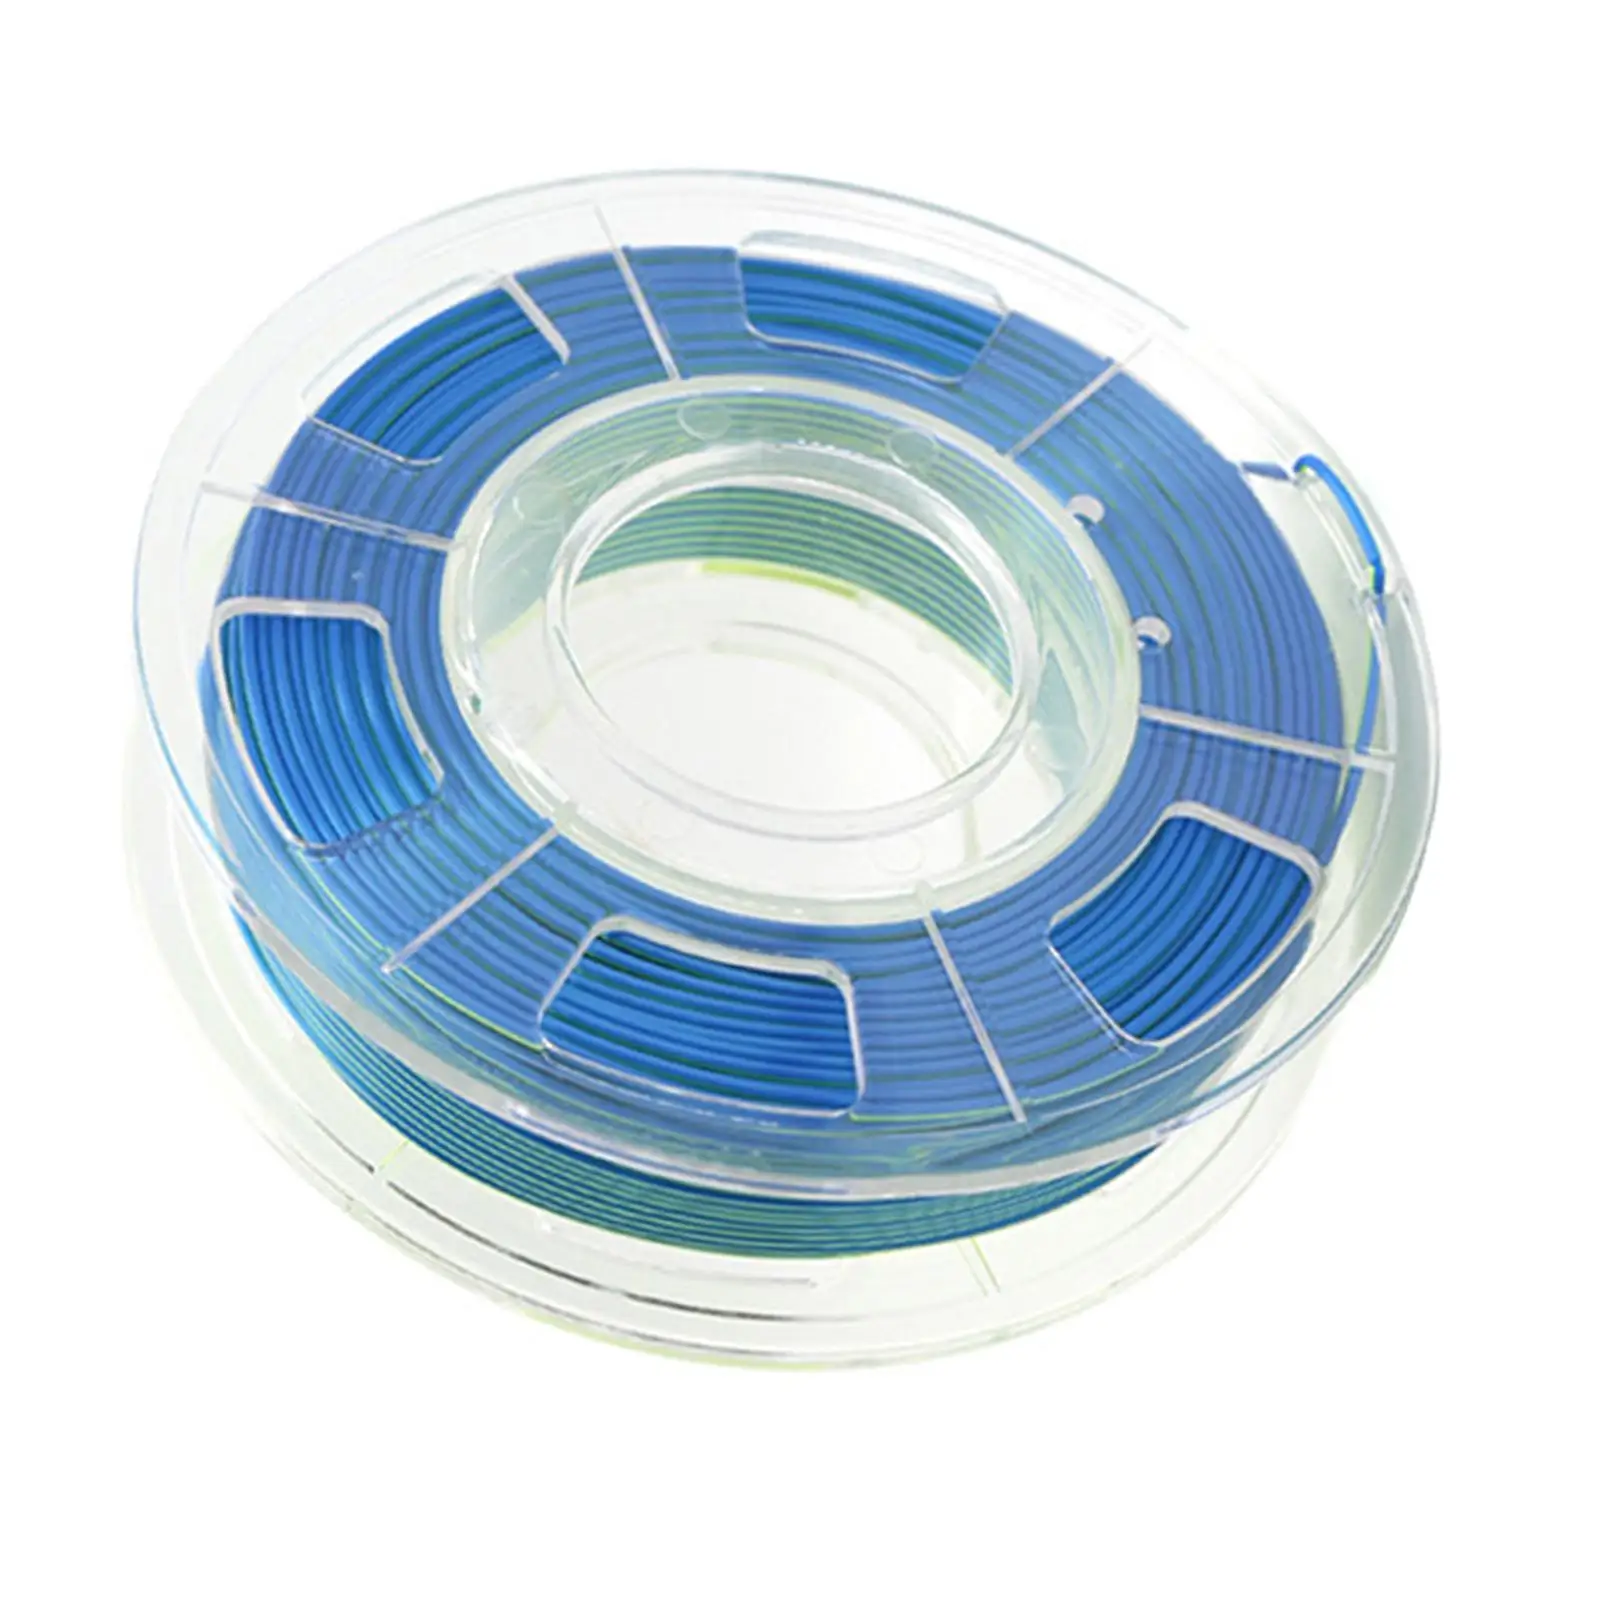 3D Printer Filament 1.75mm 1kg Shiny Texture Printing Smoothly 3D Printing Material Filament Stronger Toughness for DIY